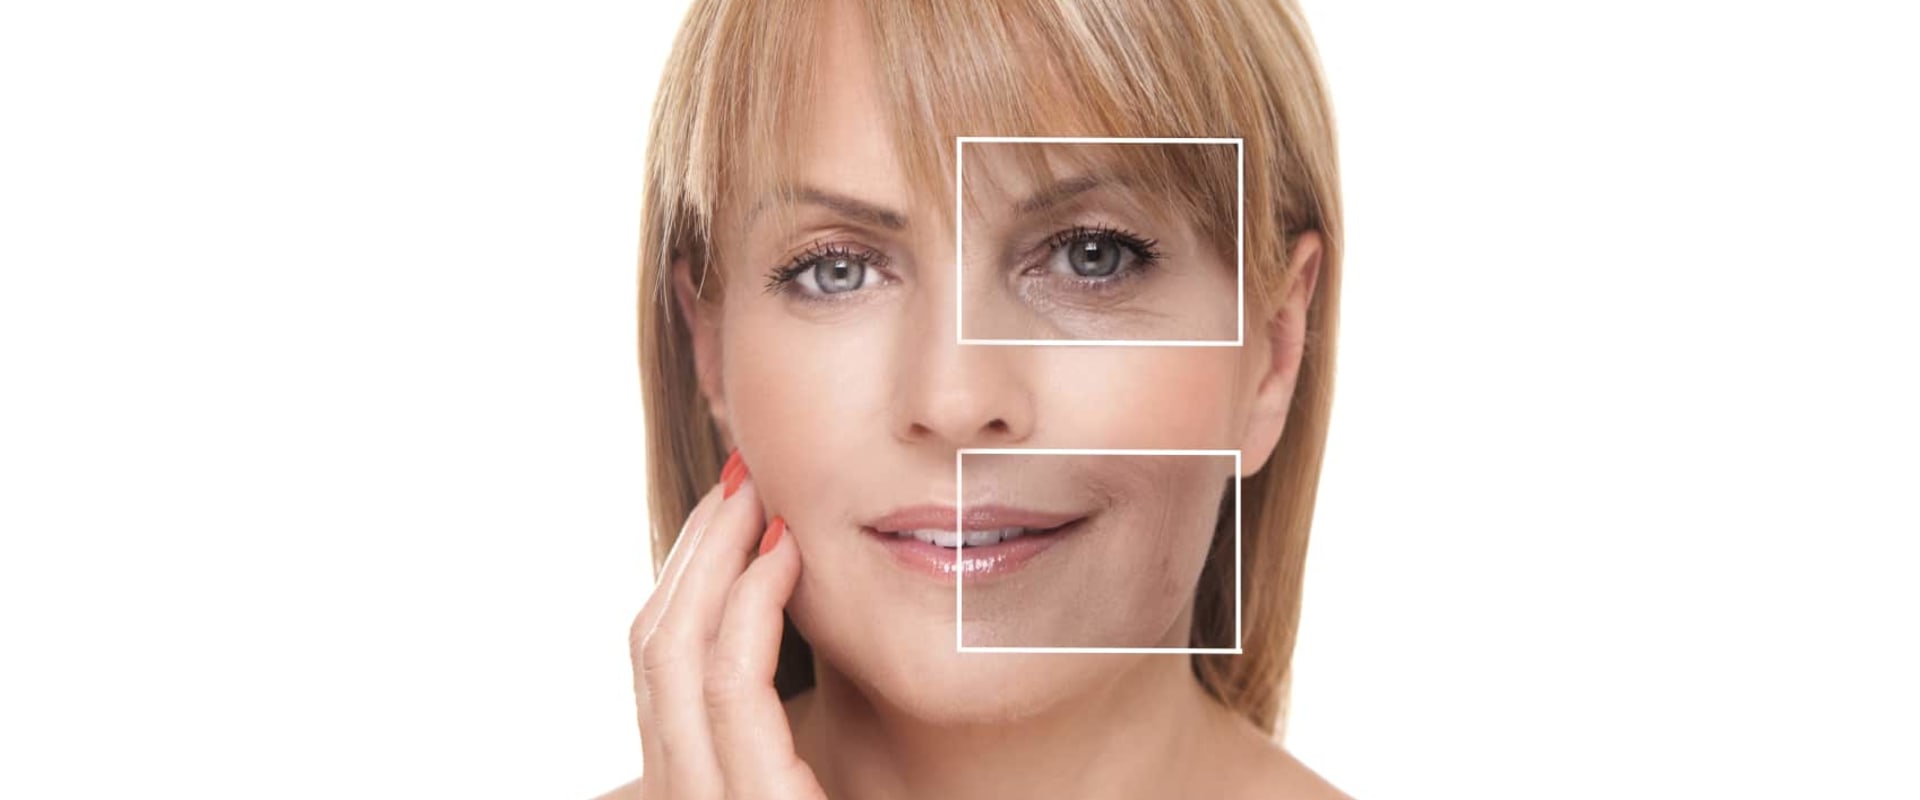 Why Choose Dysport Over Botox: An Expert's Perspective